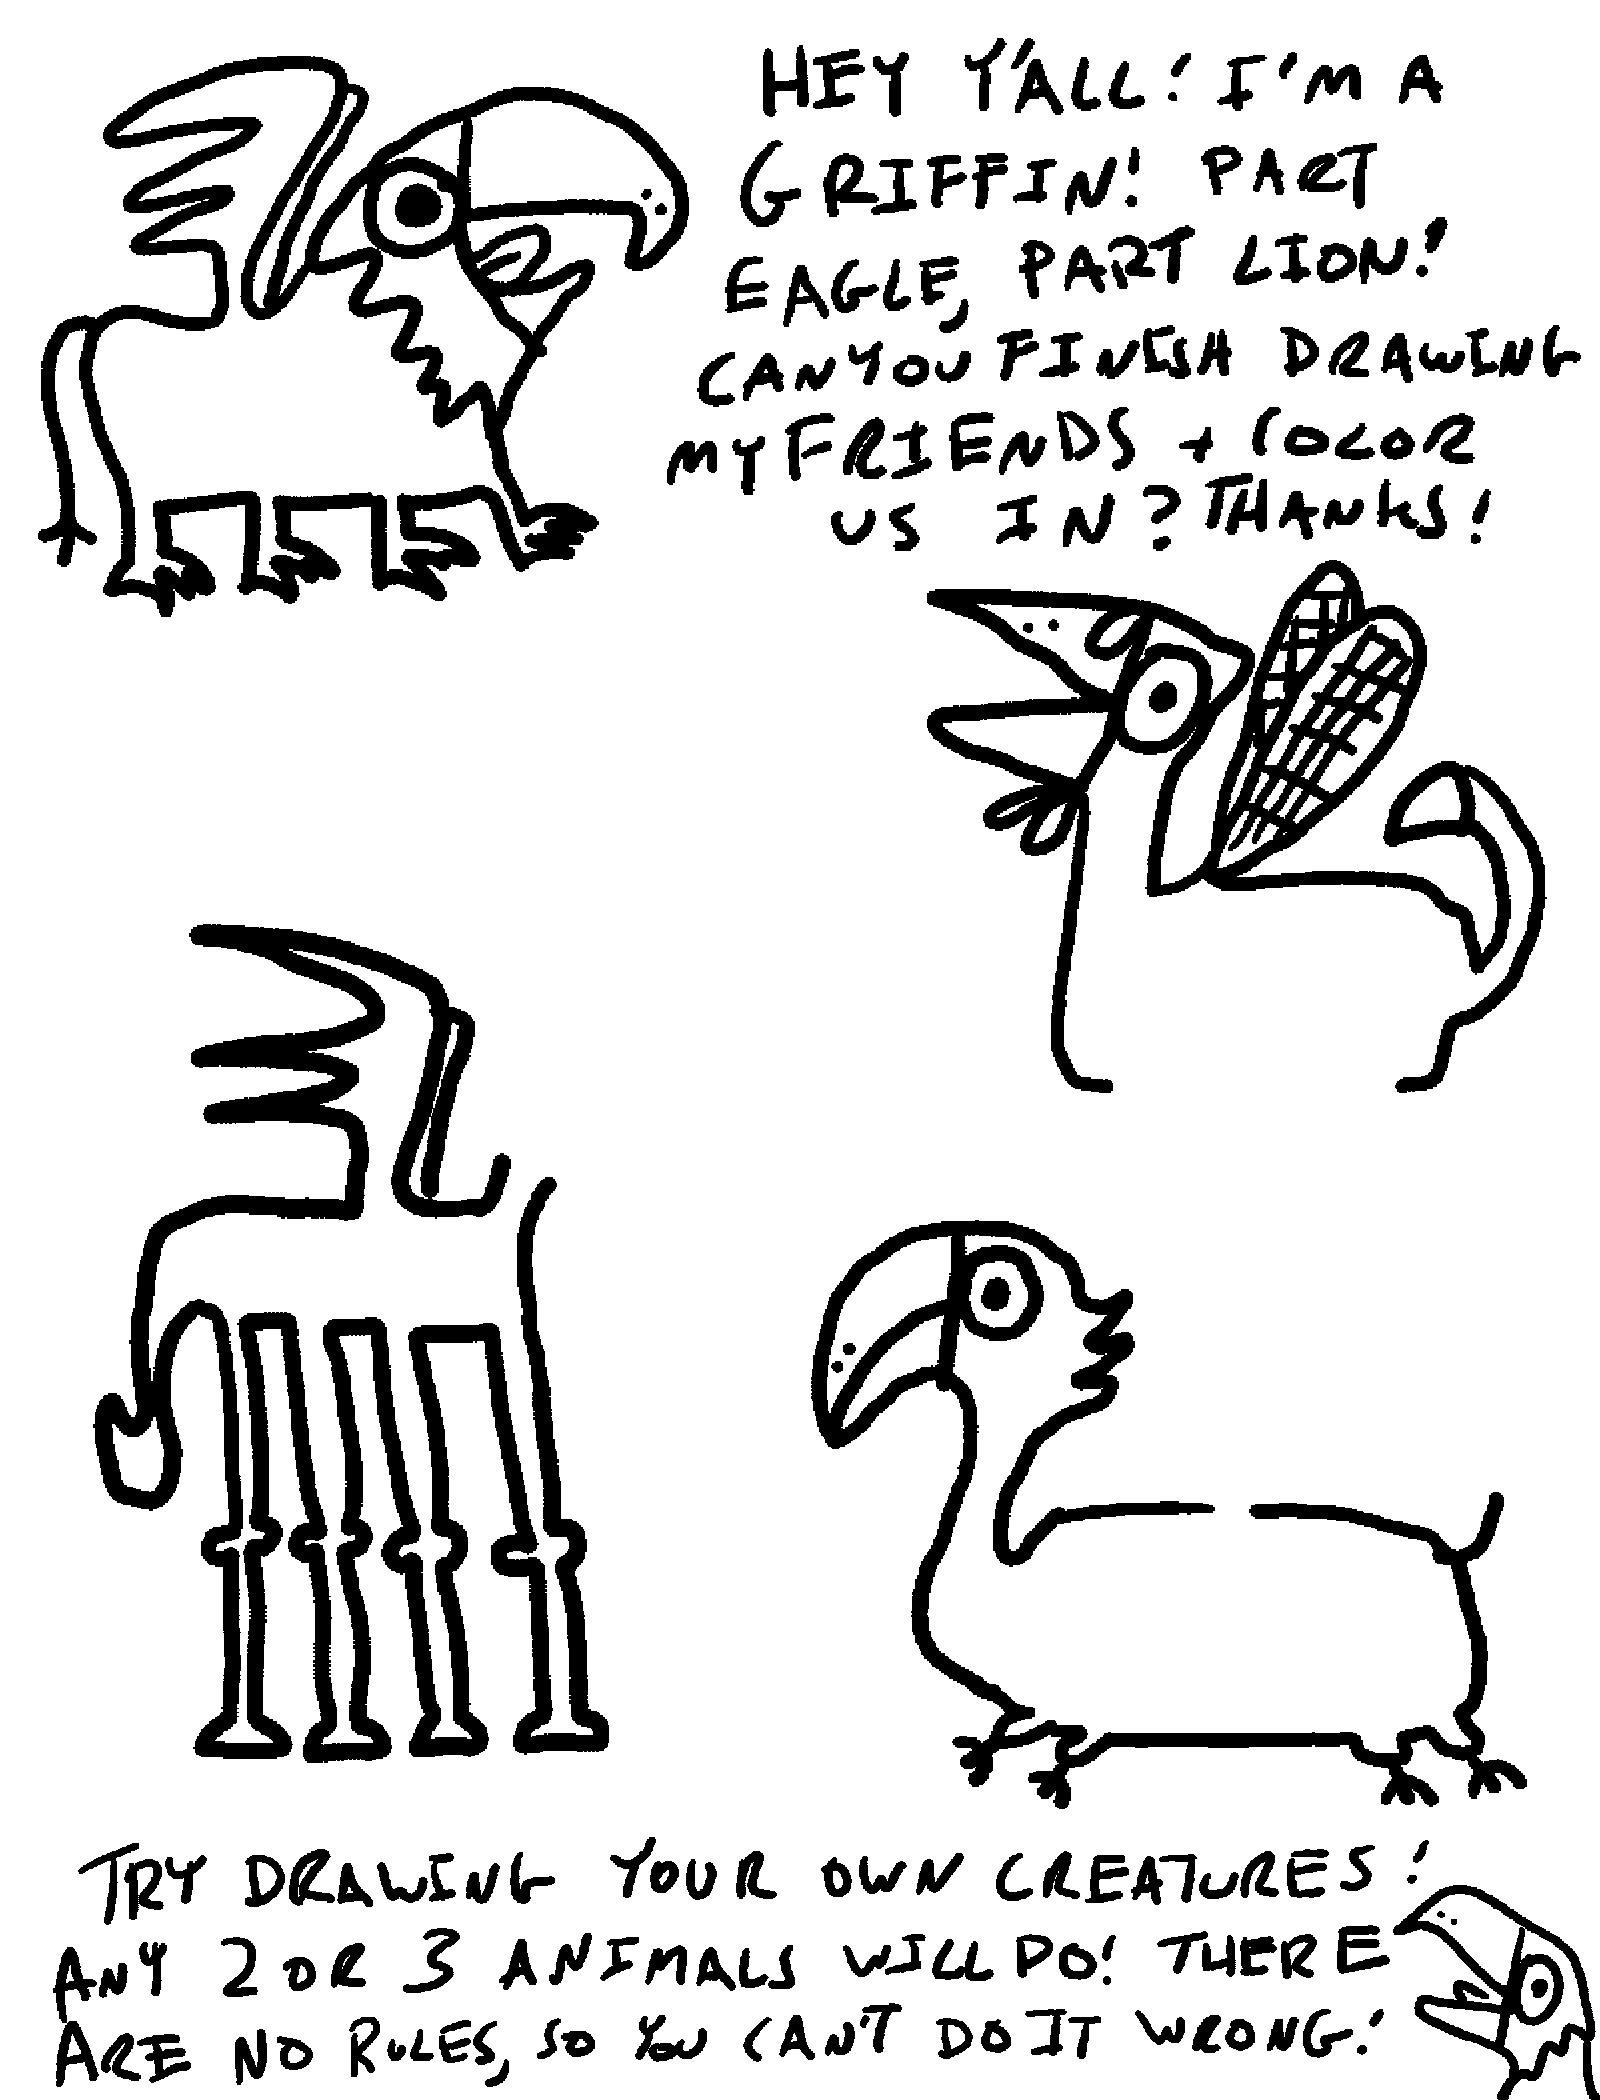 Draw A Griffin with this activity sheet